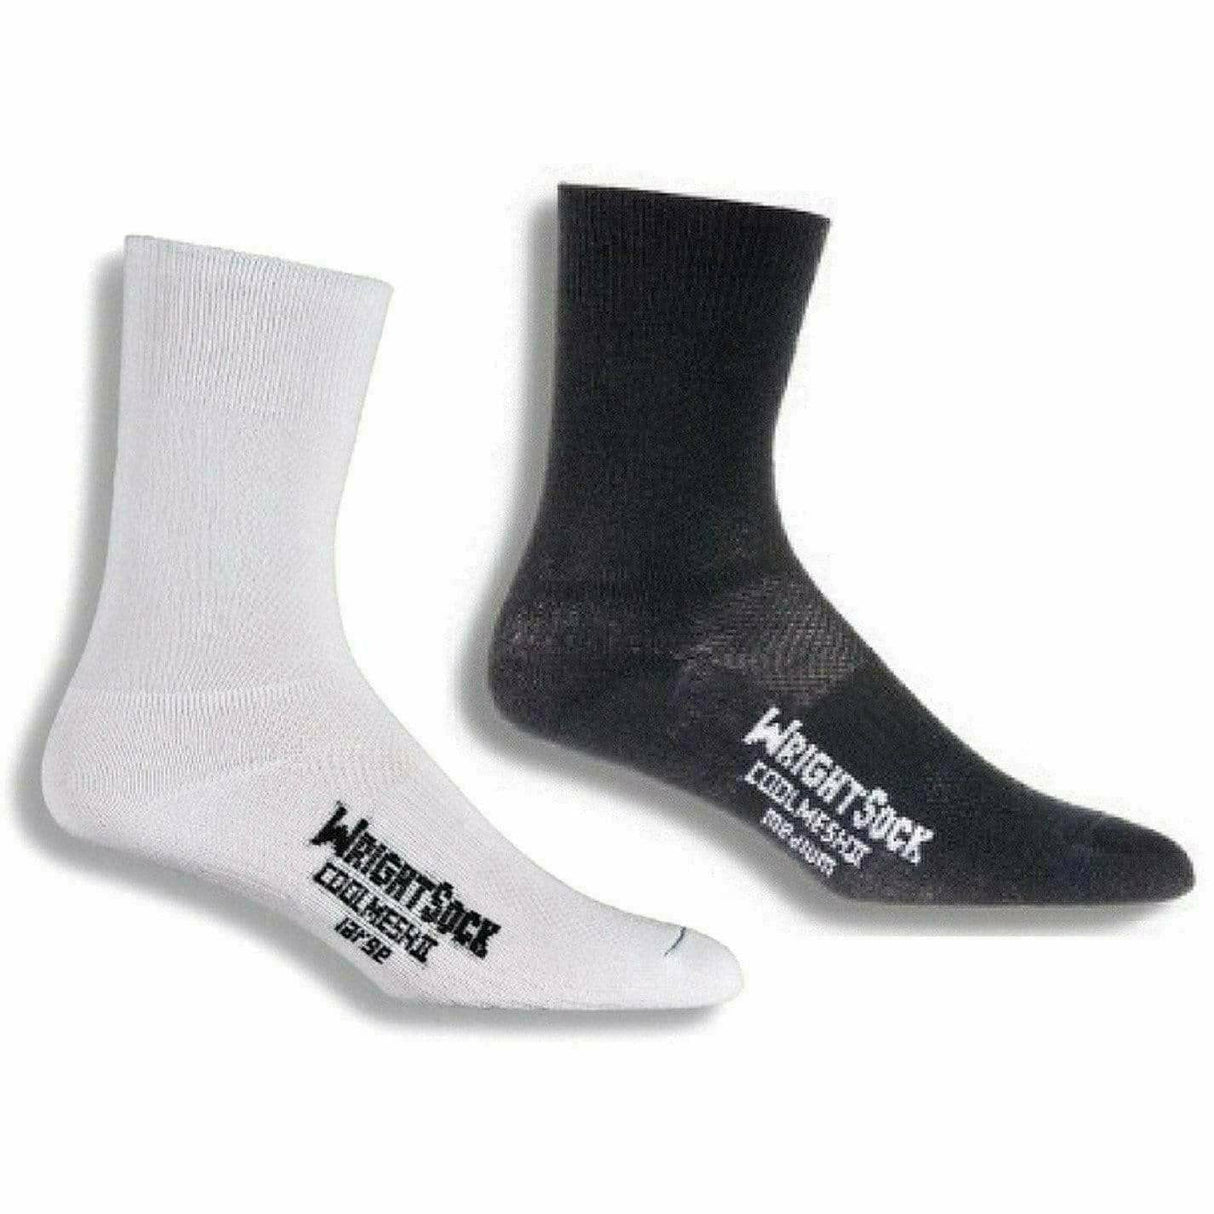 Wrightsock Double-Layer Coolmesh II Lightweight Crew Socks - Clearance  -  Small / Black/White / 2-Pair Pack